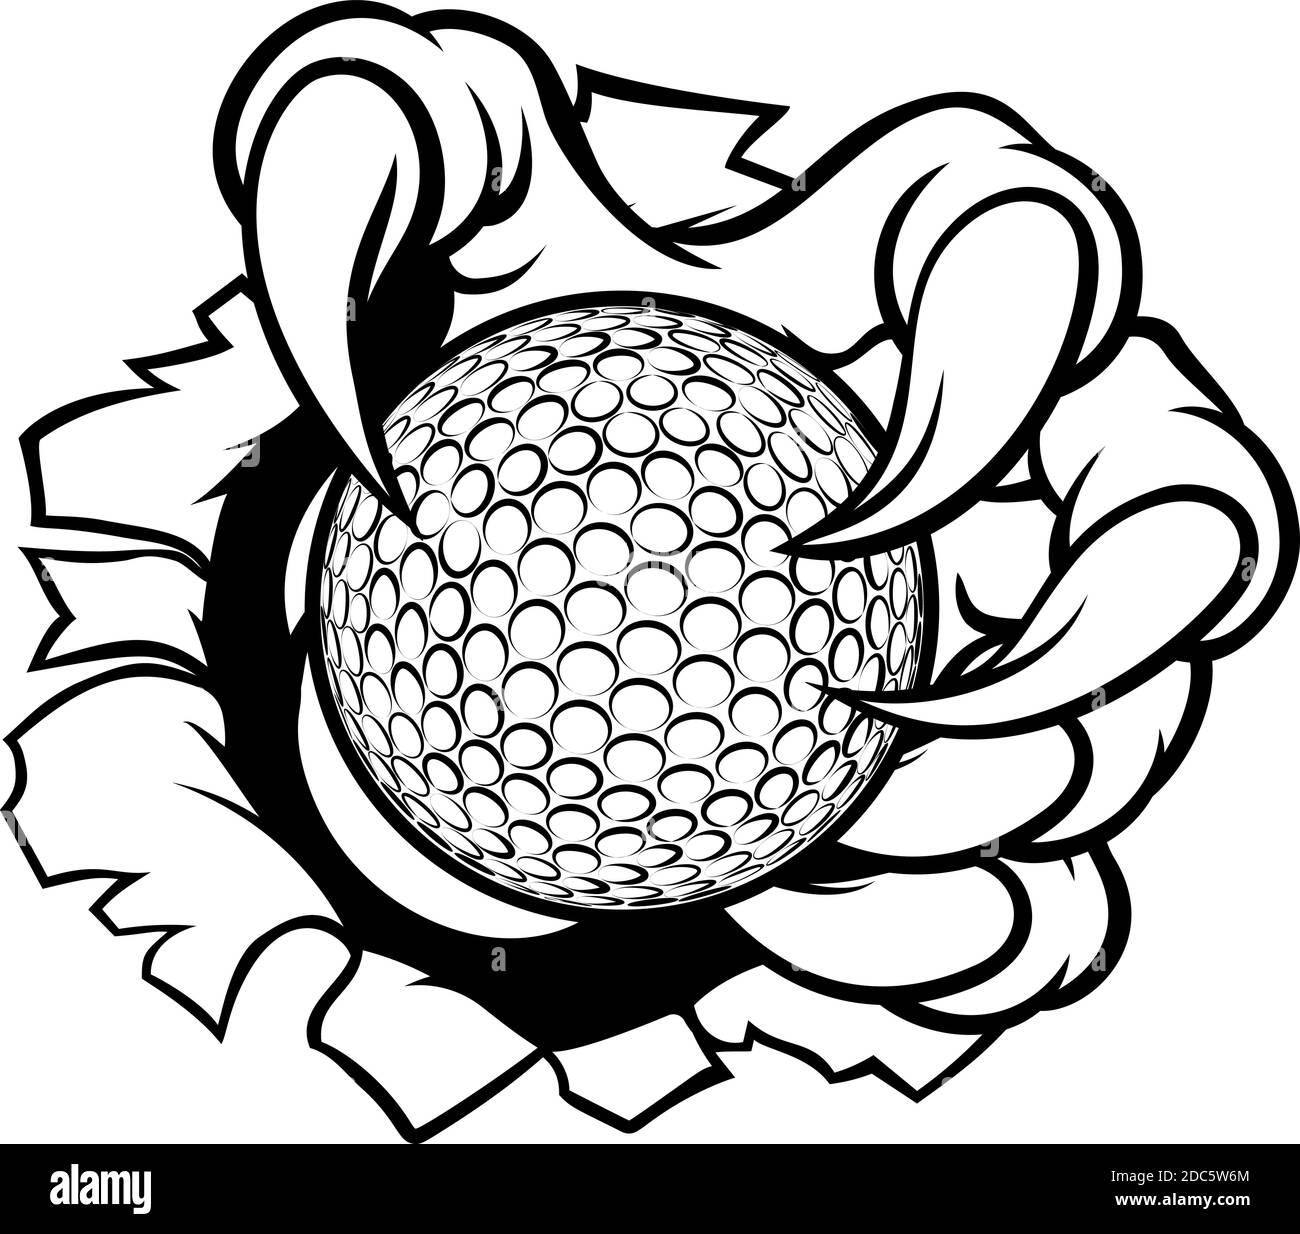 Golf Ball Claw Monster Sports Hand Stock Vector